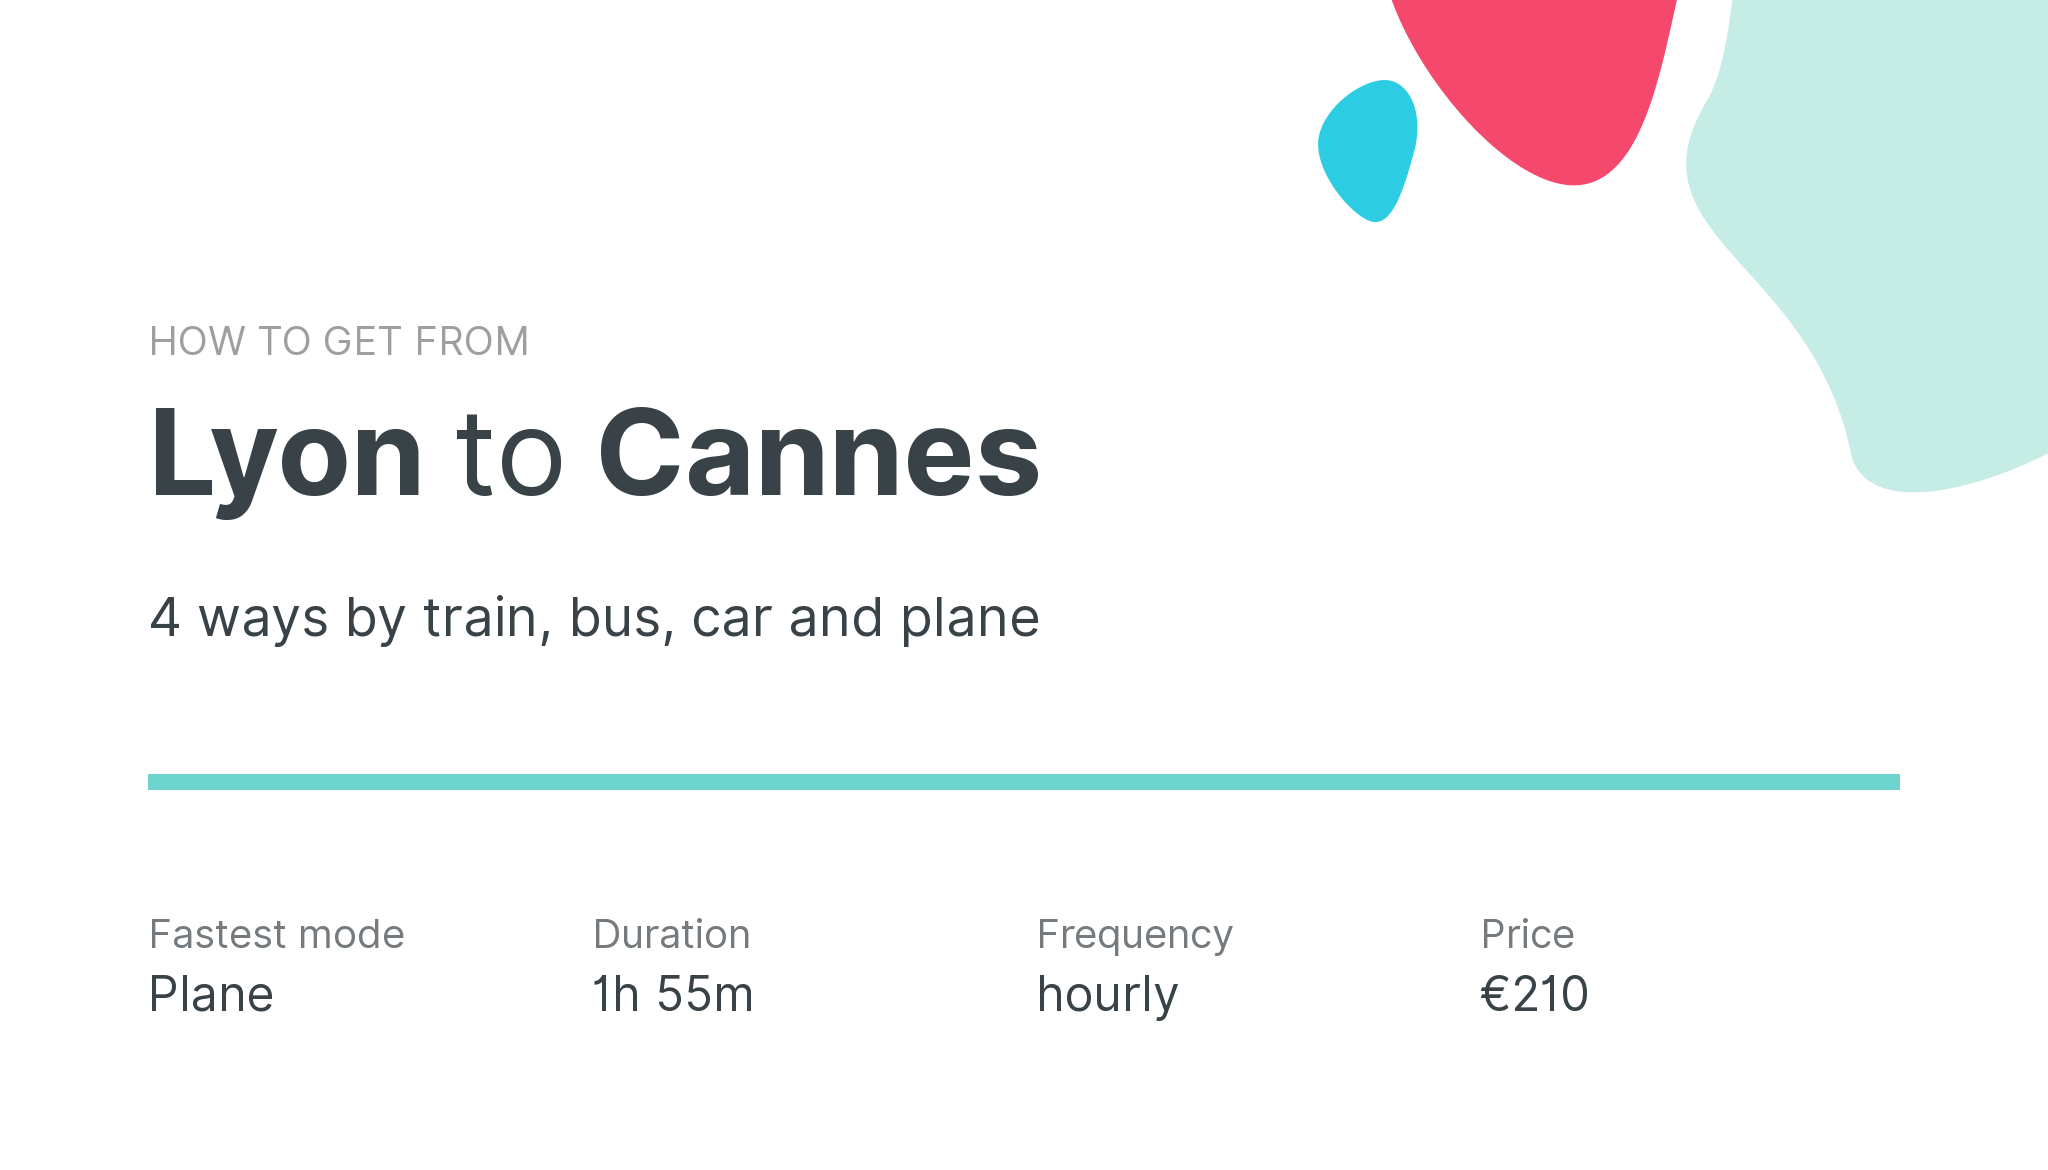 How do I get from Lyon to Cannes